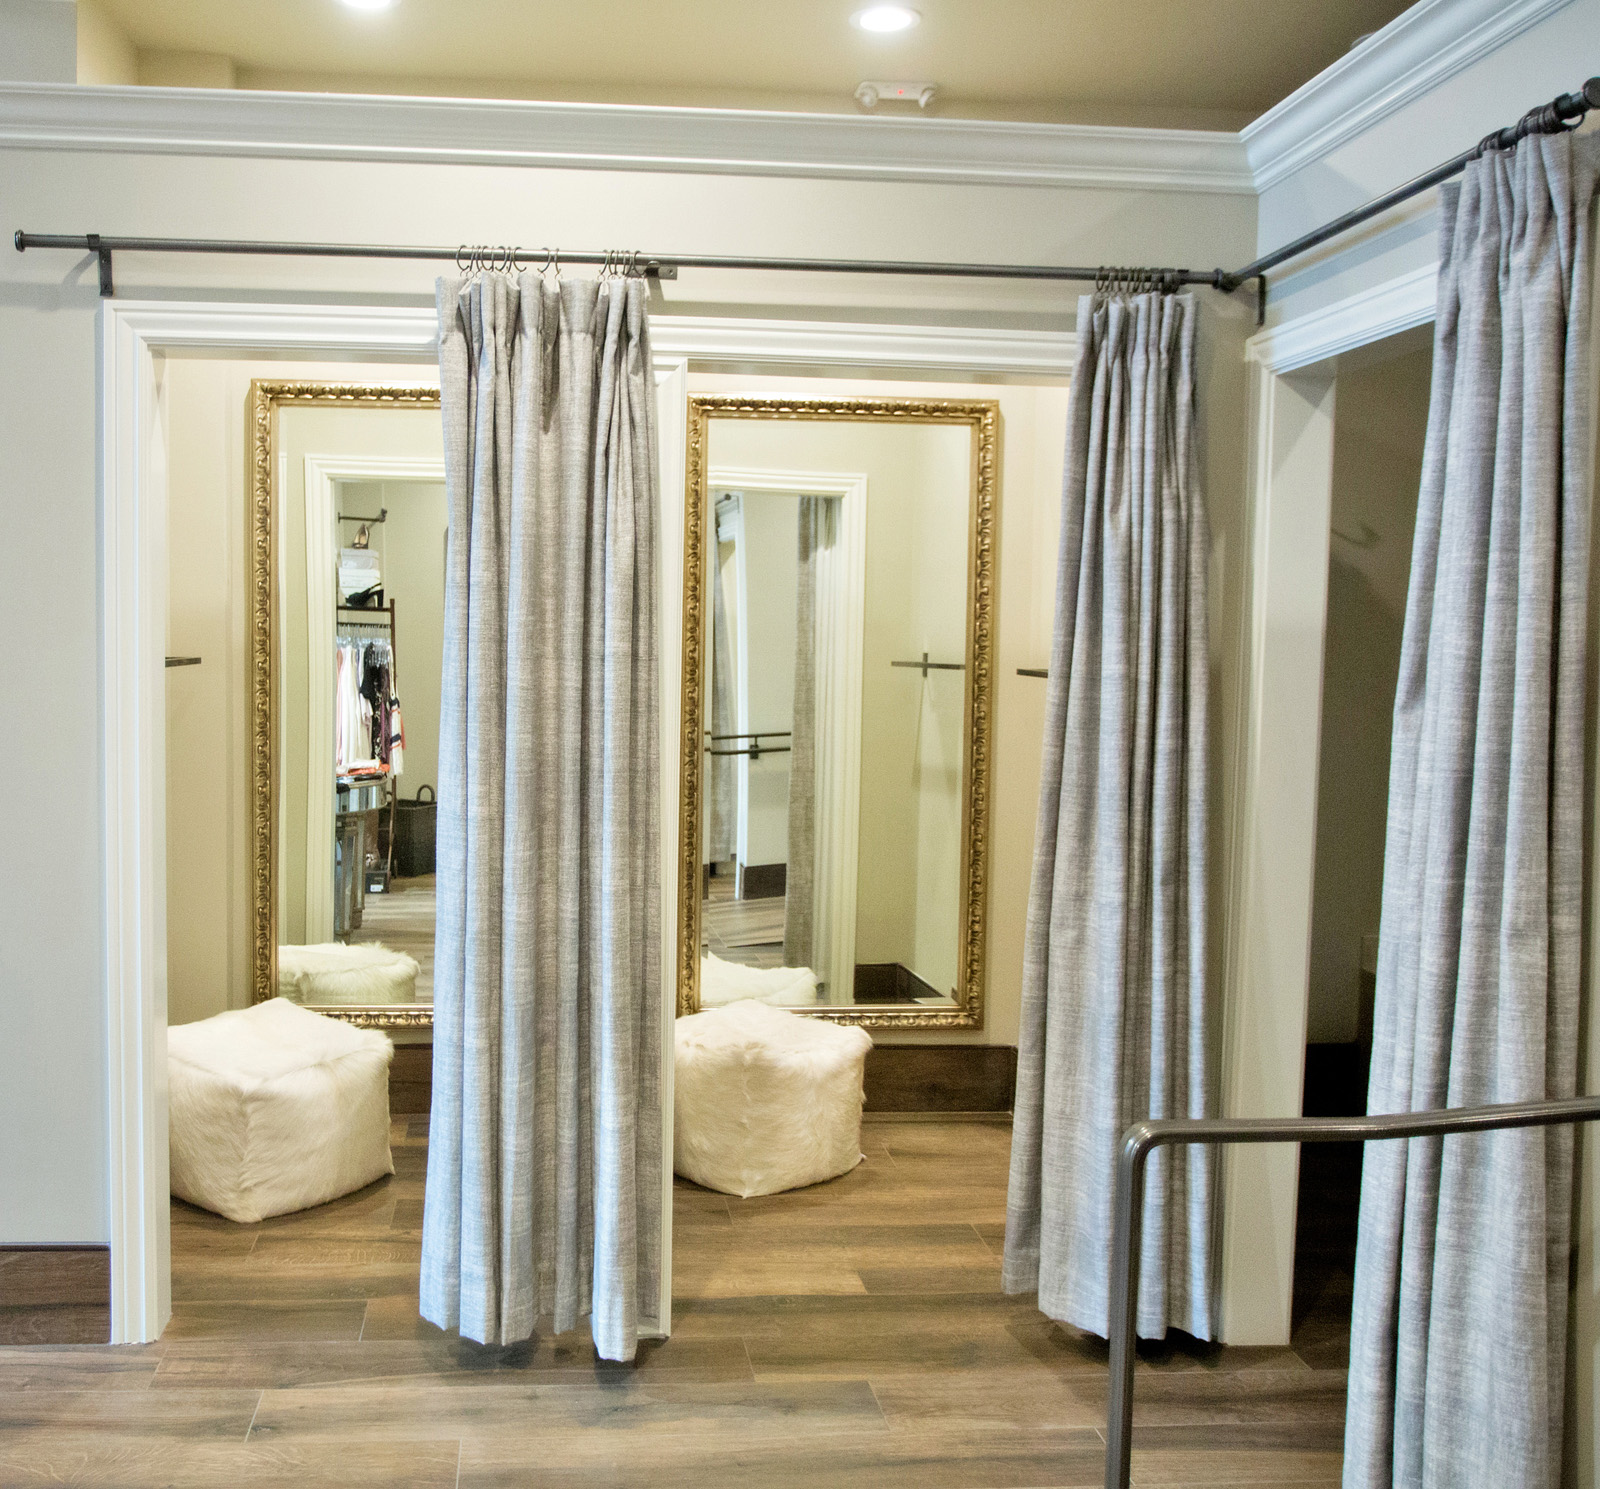 Fitting rooms at BellaJames Women’s Boutique